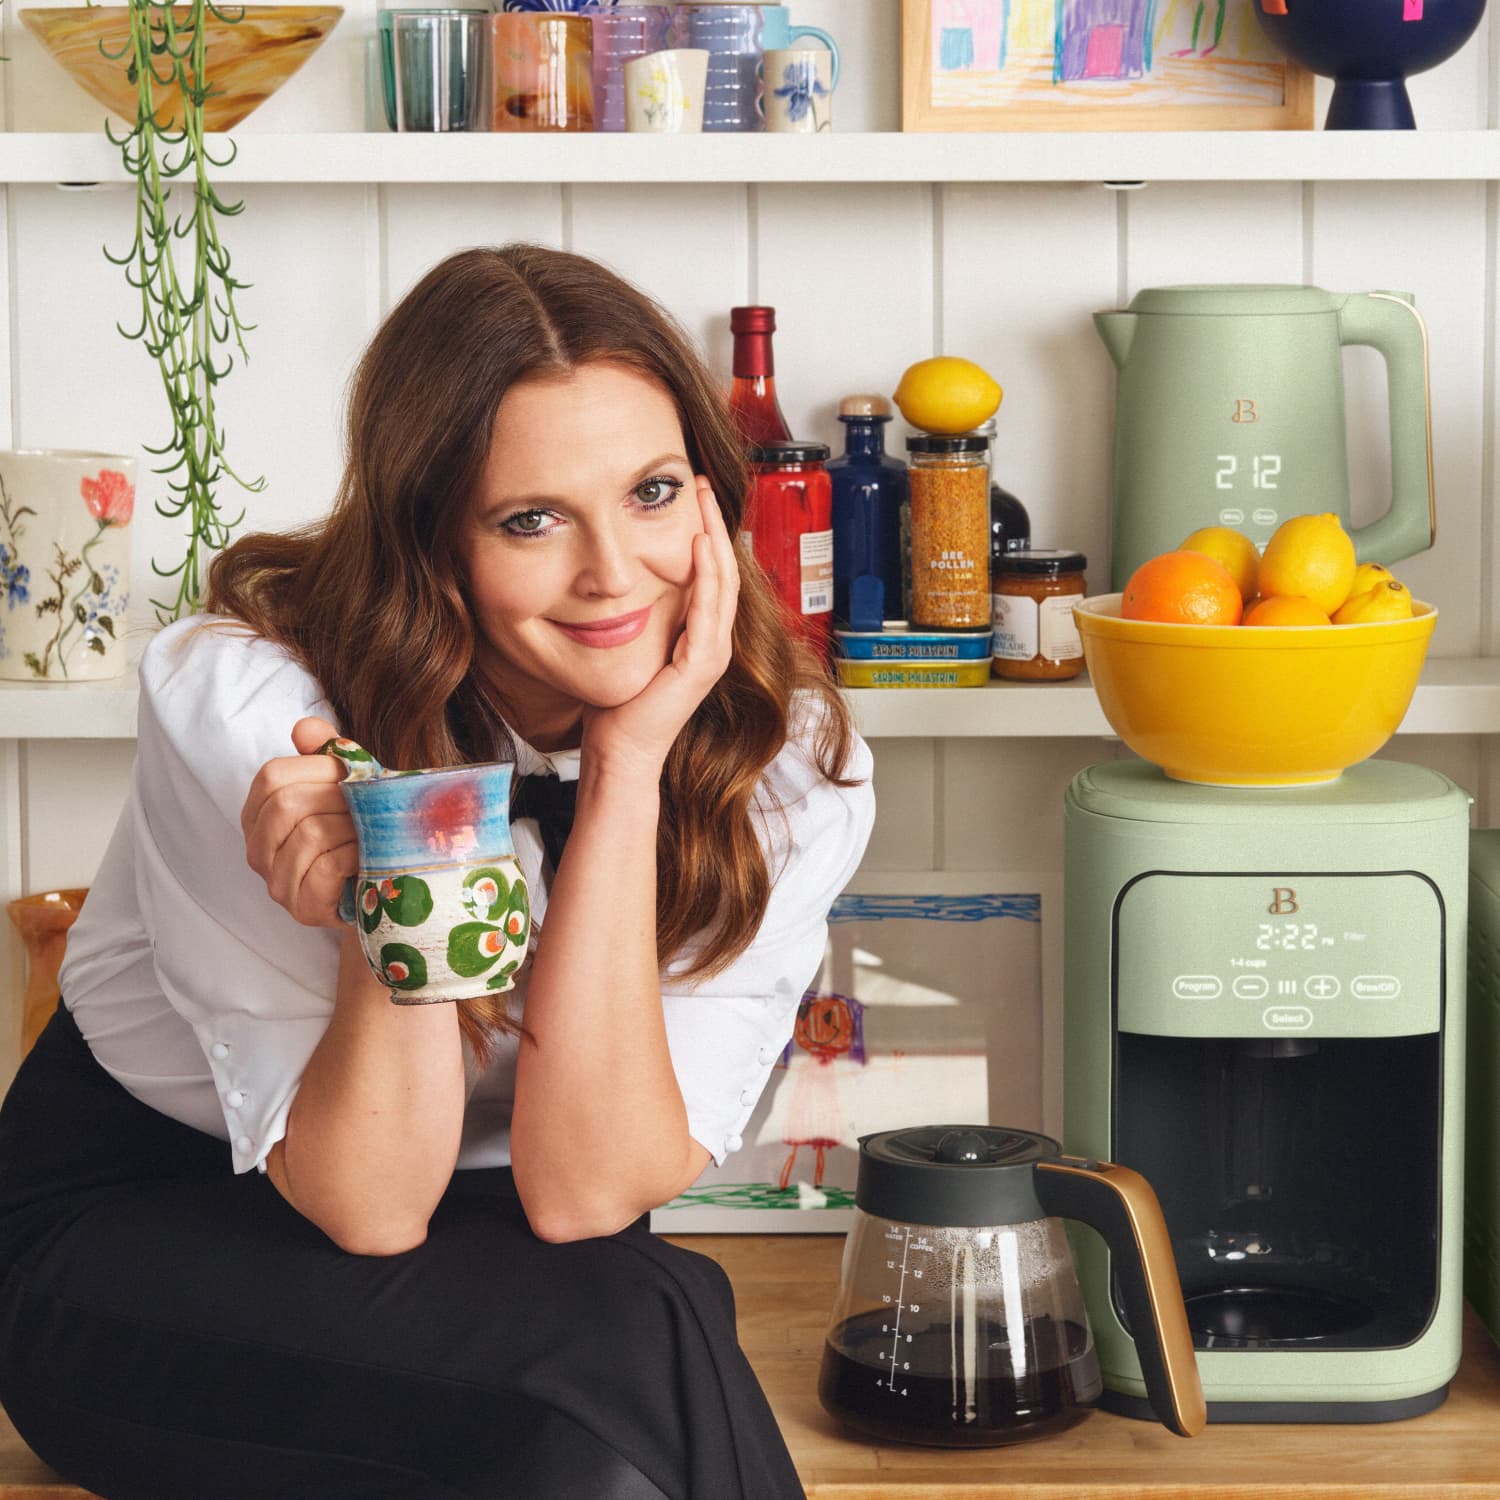 When your cookware becomes your decor 😍 We are loving @drewbarrymore's  kitchen reno!